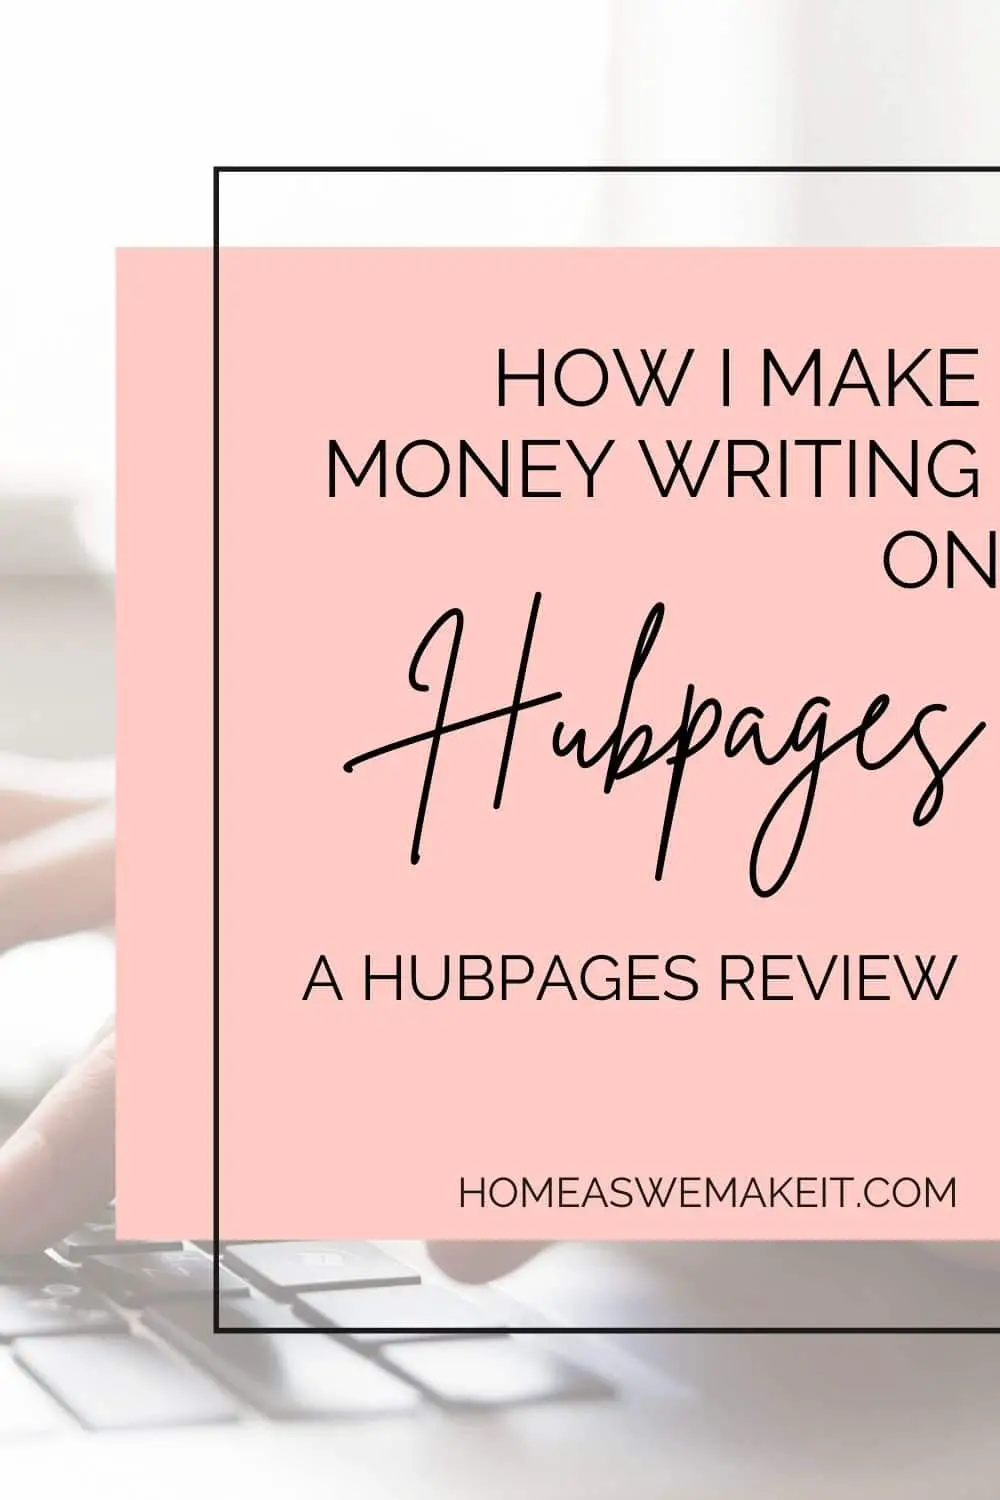 How I Make Money on Hubpages: a Hubpages Review